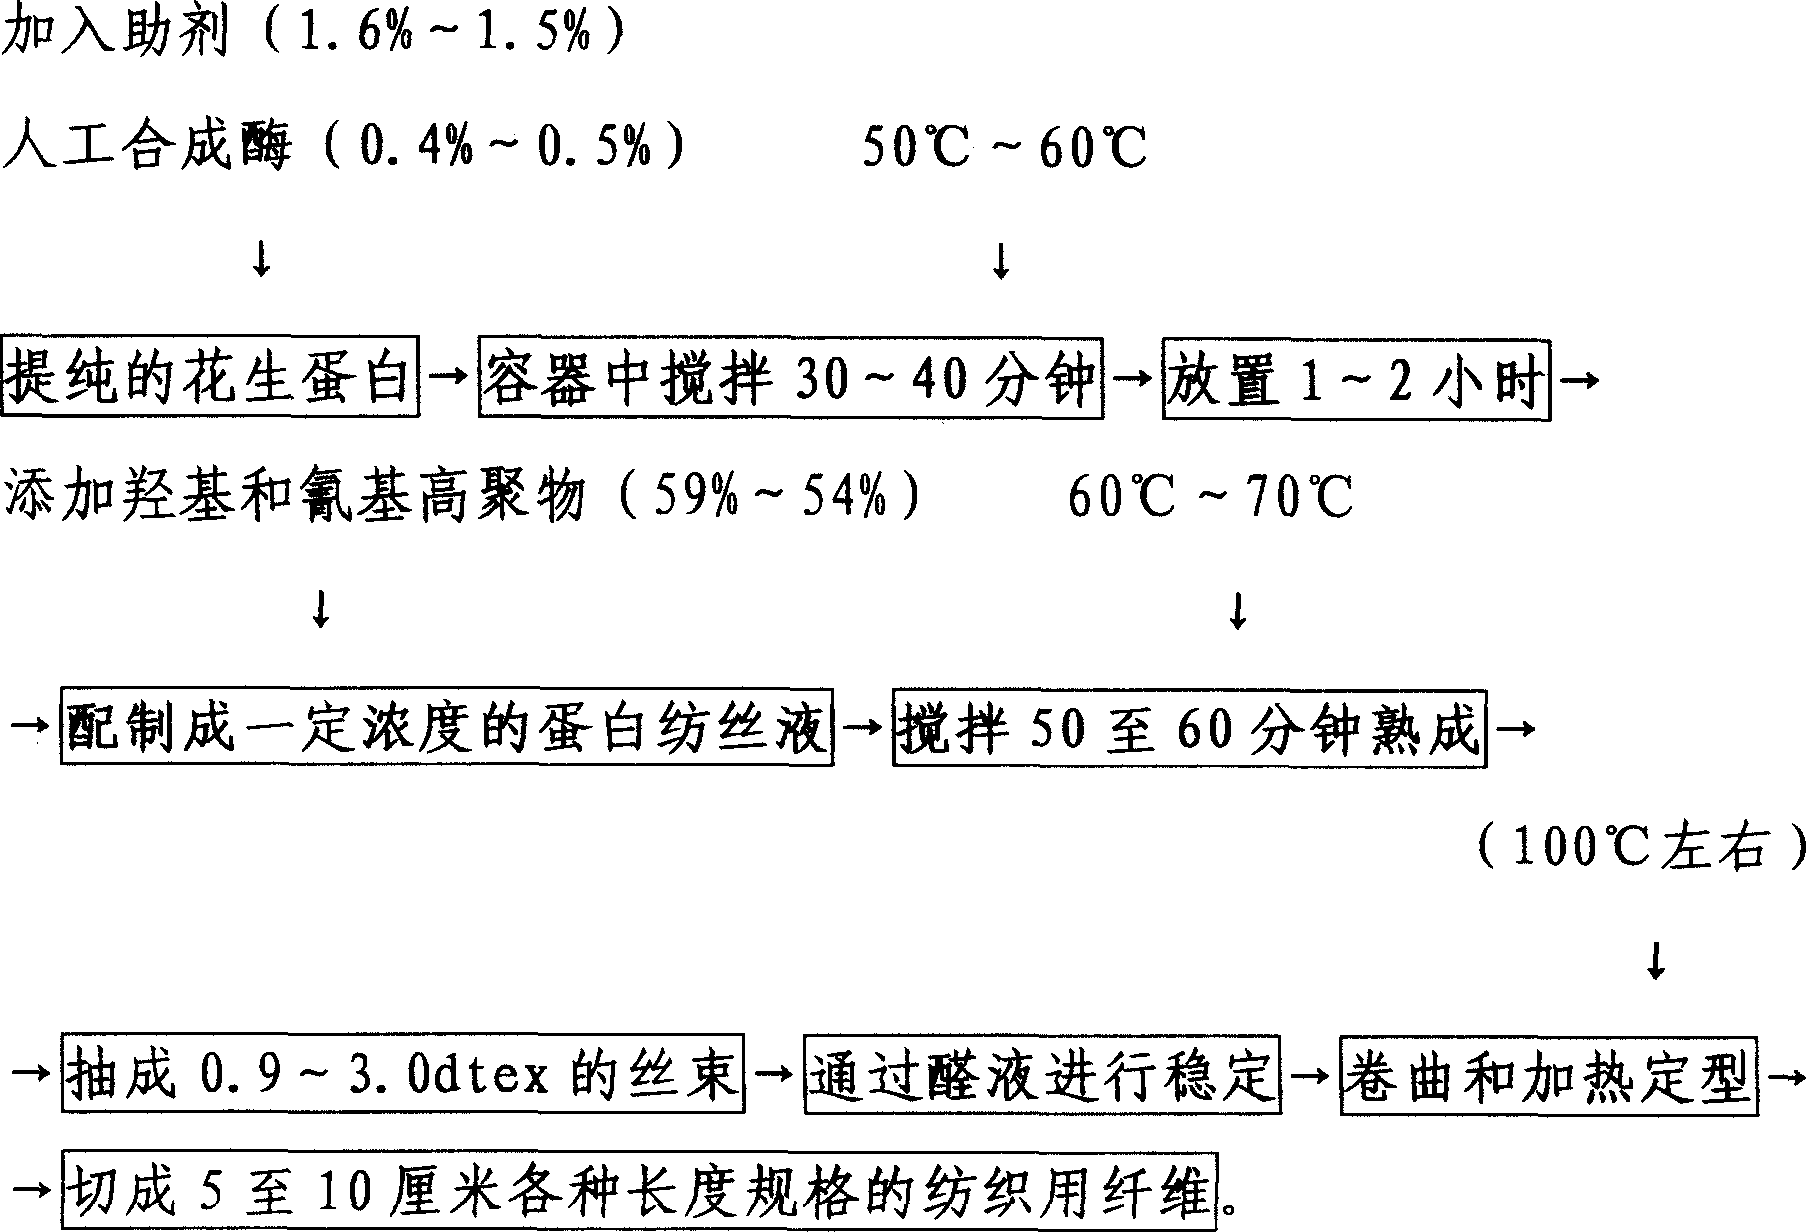 Process for producing fiber from peanut protein